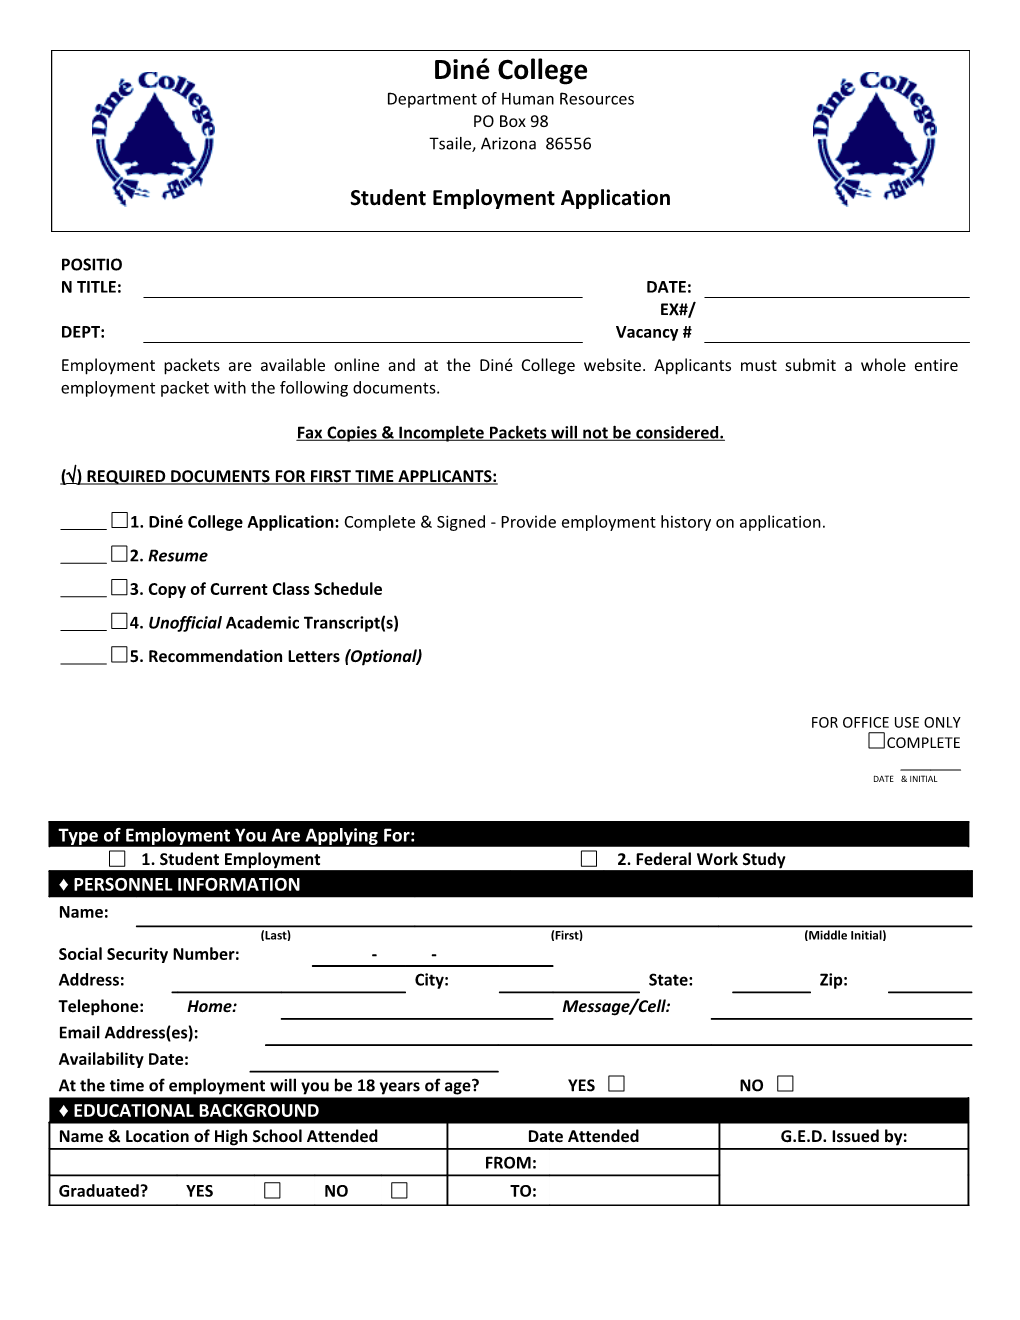 Employment Packets Are Available Online Or at Diné College Sites